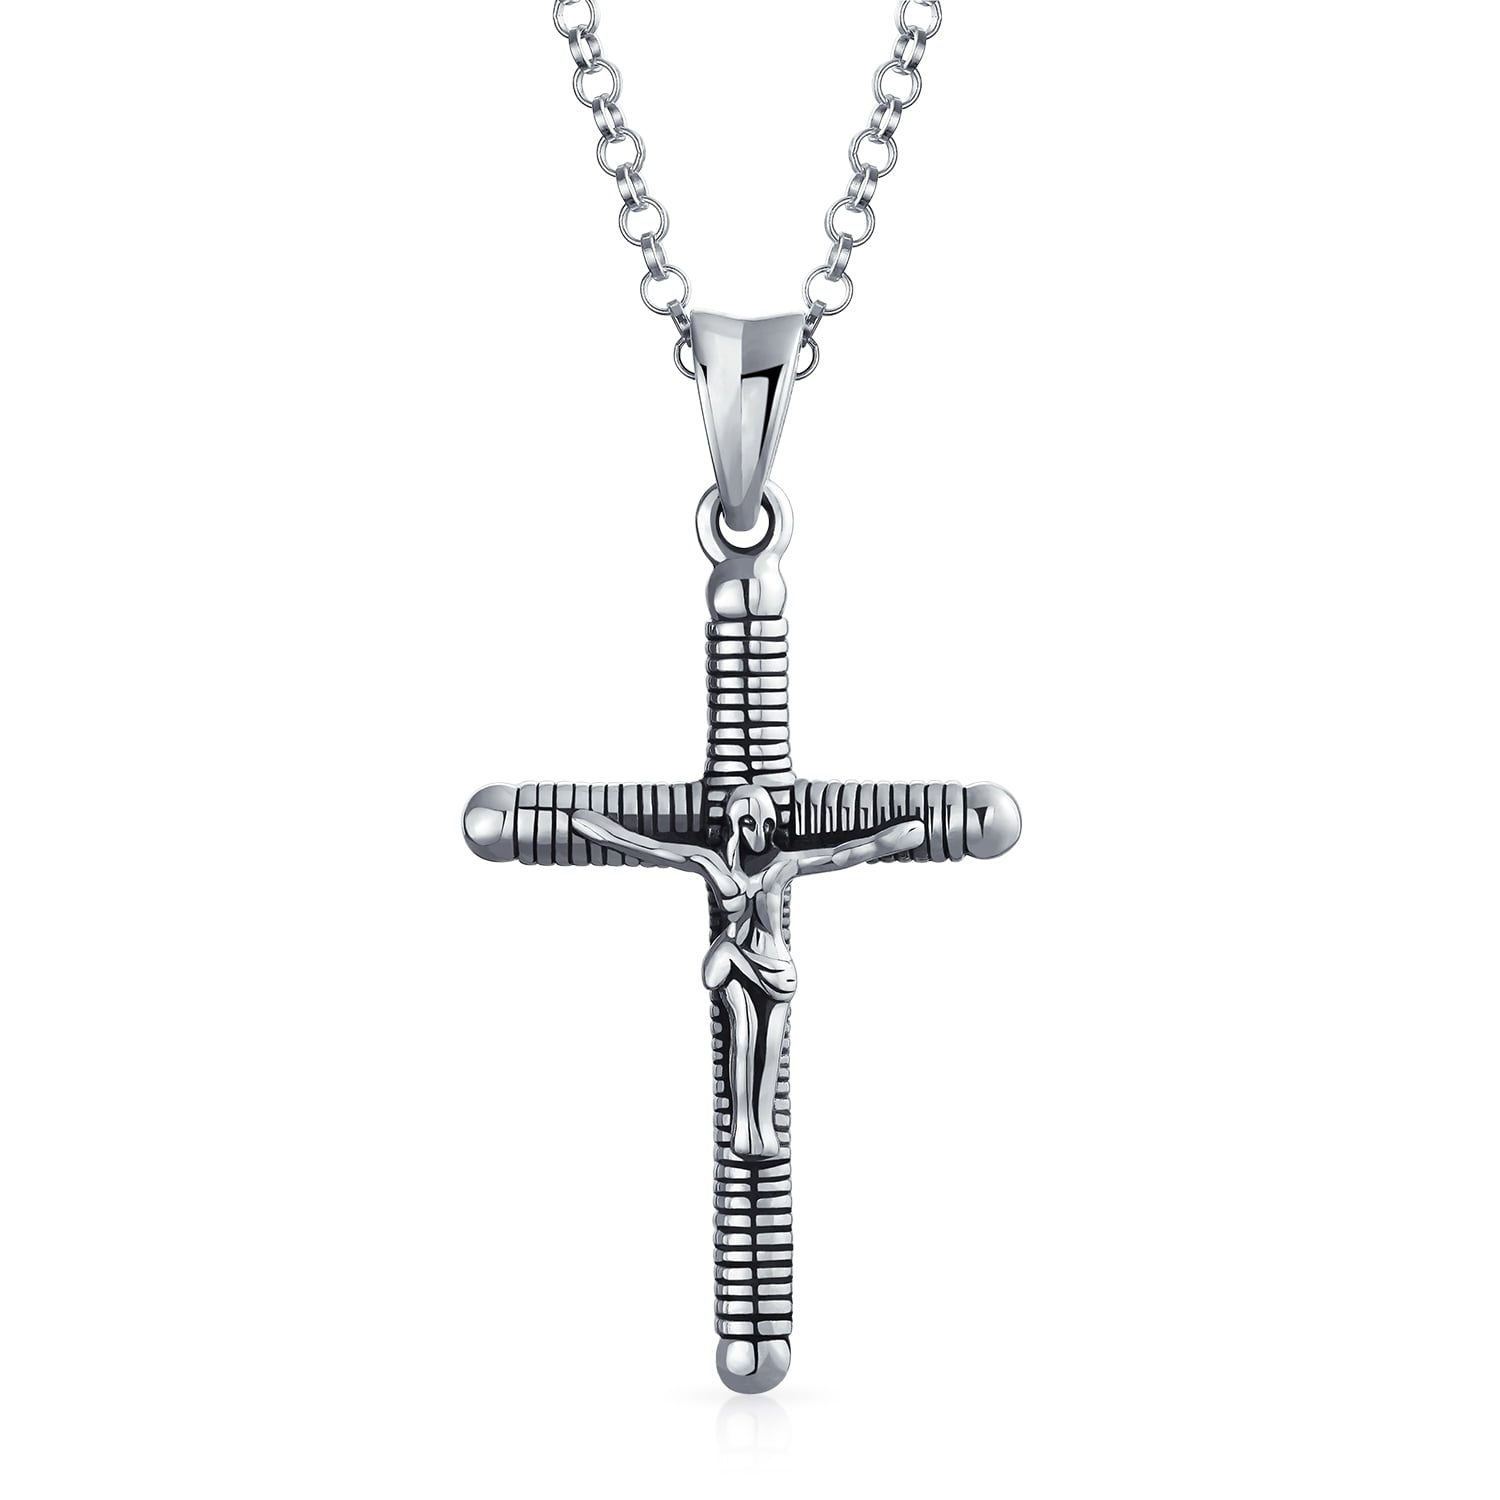 ChicSilver Personalized 925 Sterling Silver Catholic Jesus Christ on INRI Cross Crucifix Pendant Necklace for Women Men with Gift Box